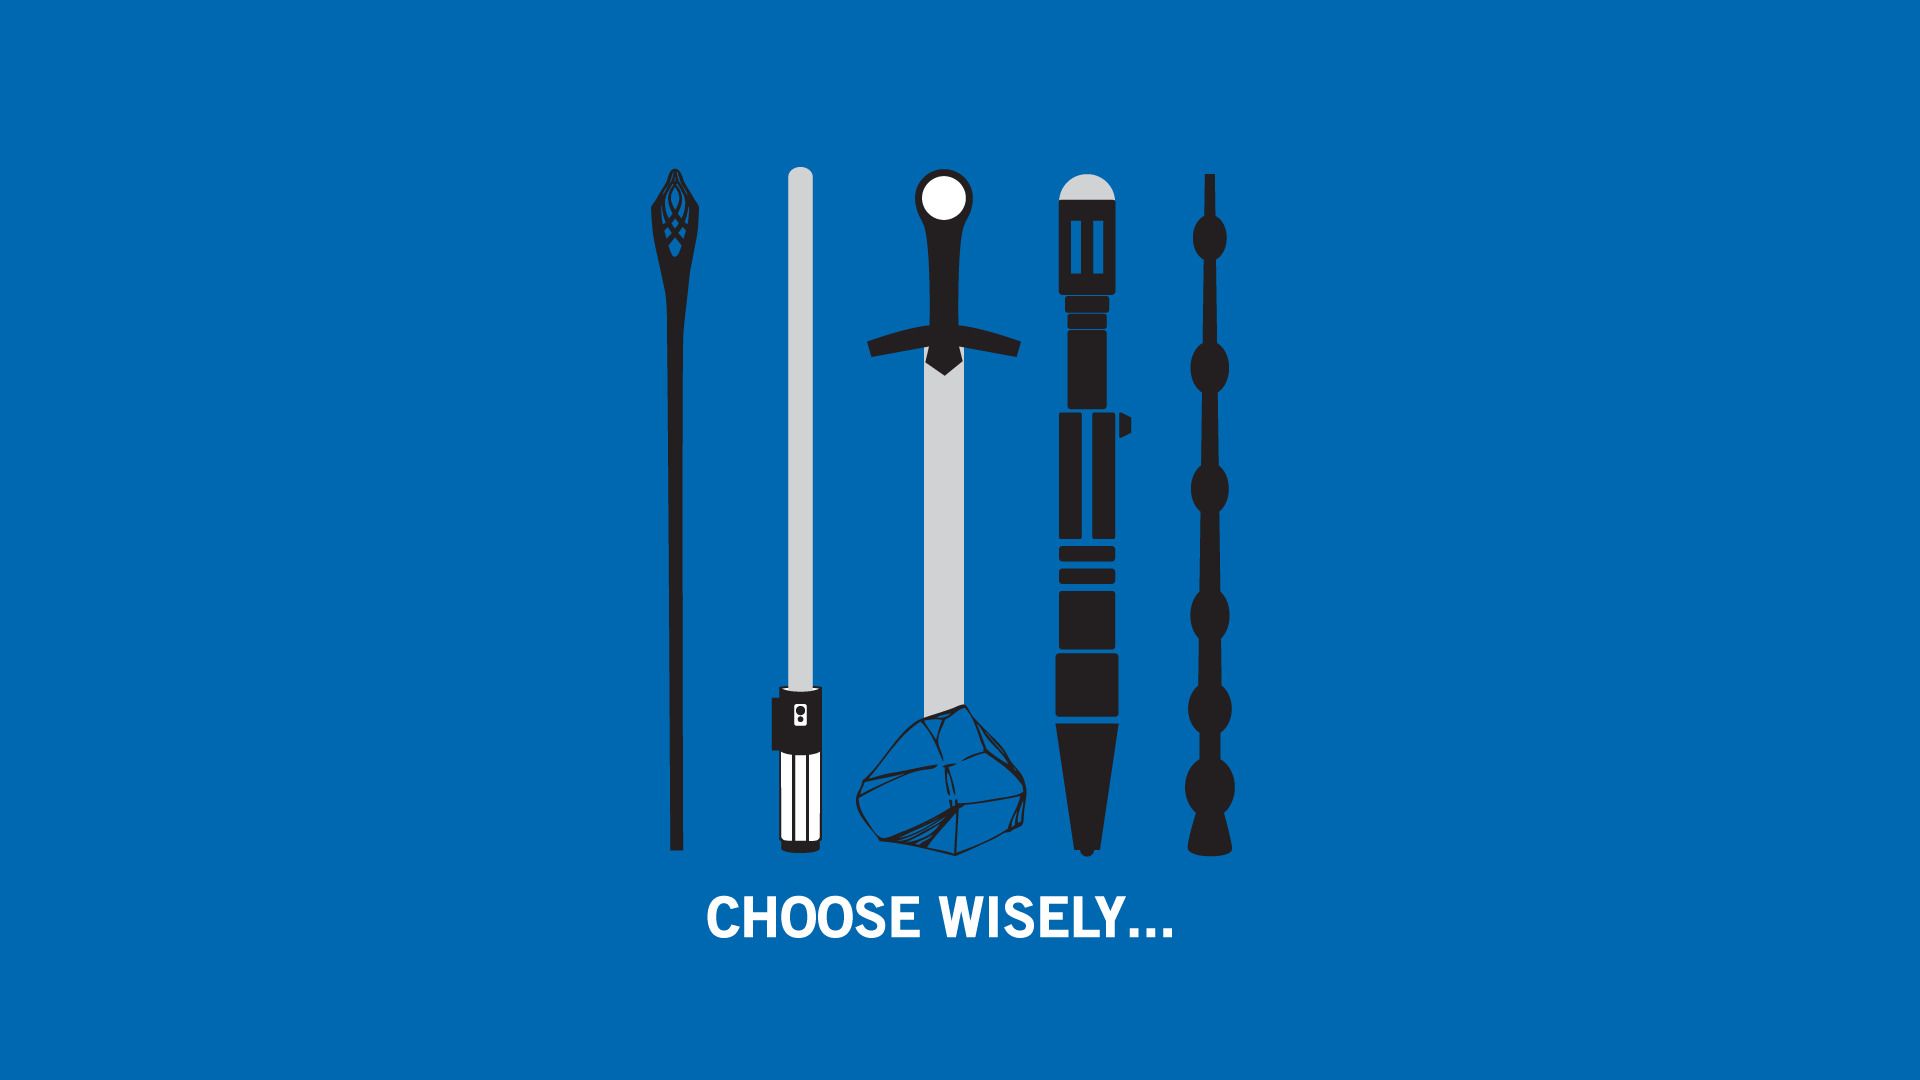 The Lord Of The Rings, Star Wars, Excalibur, Harry Potter, Doctor